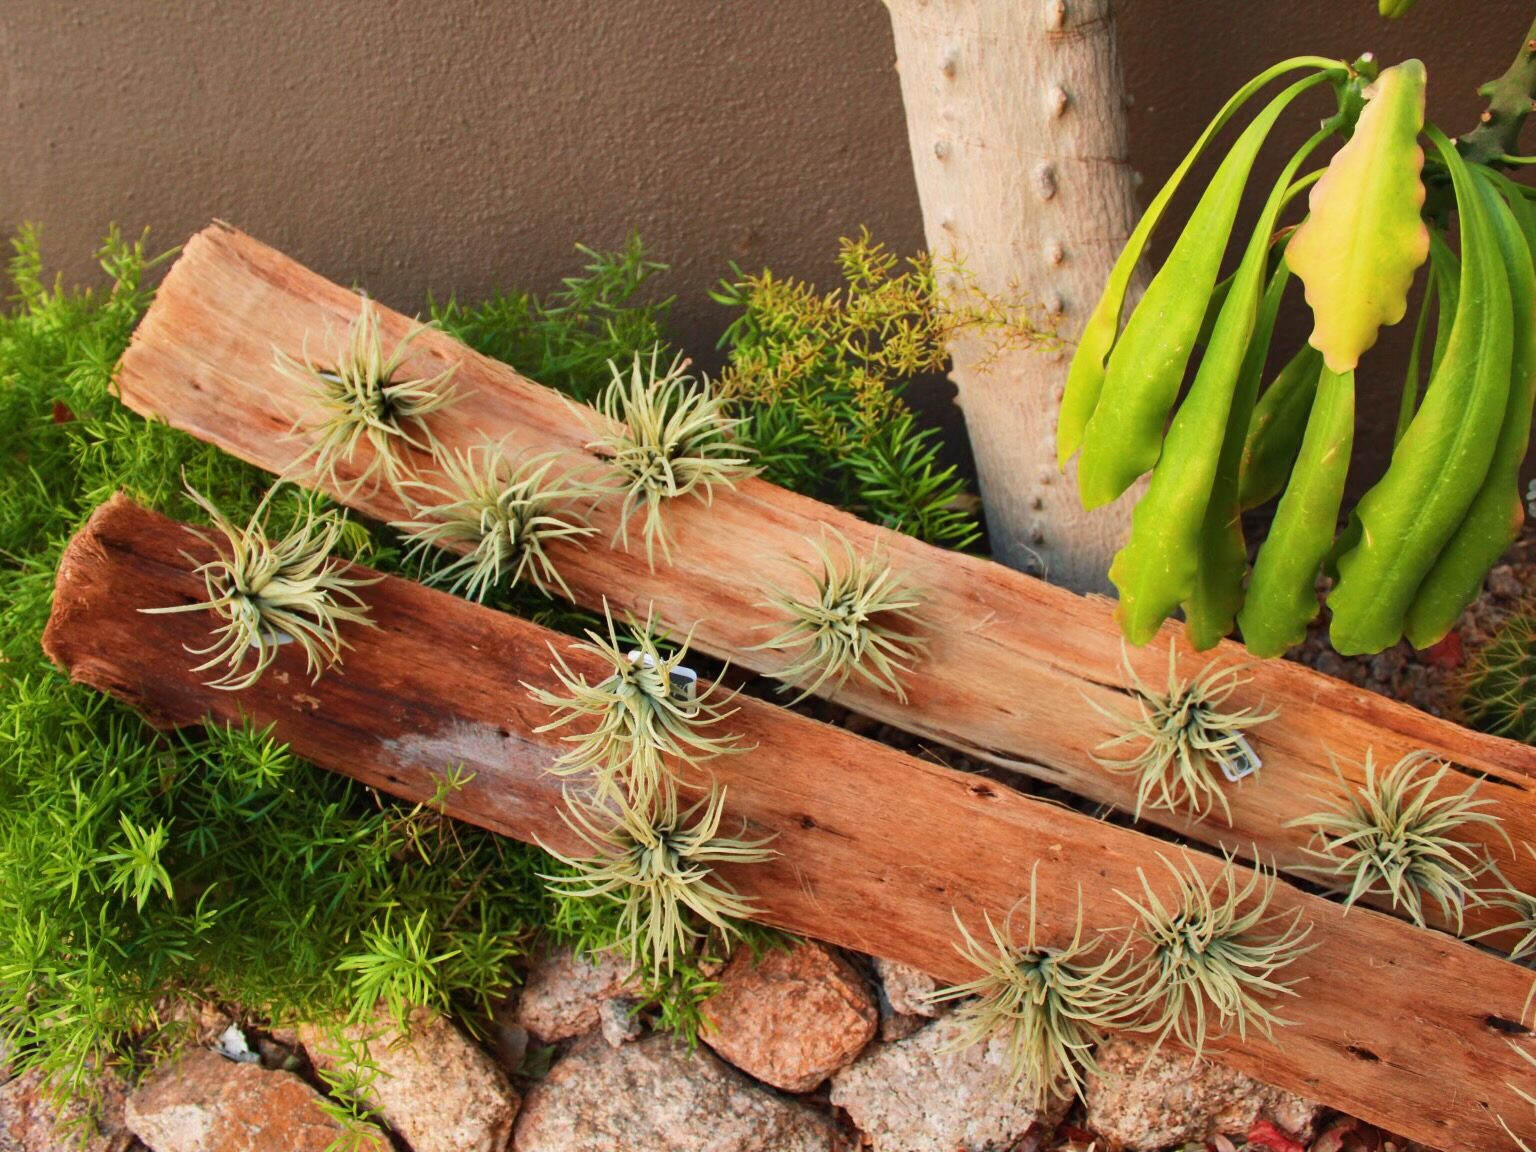 10 Super Fun Ways to Display Succulents In Your Contemporary Home!